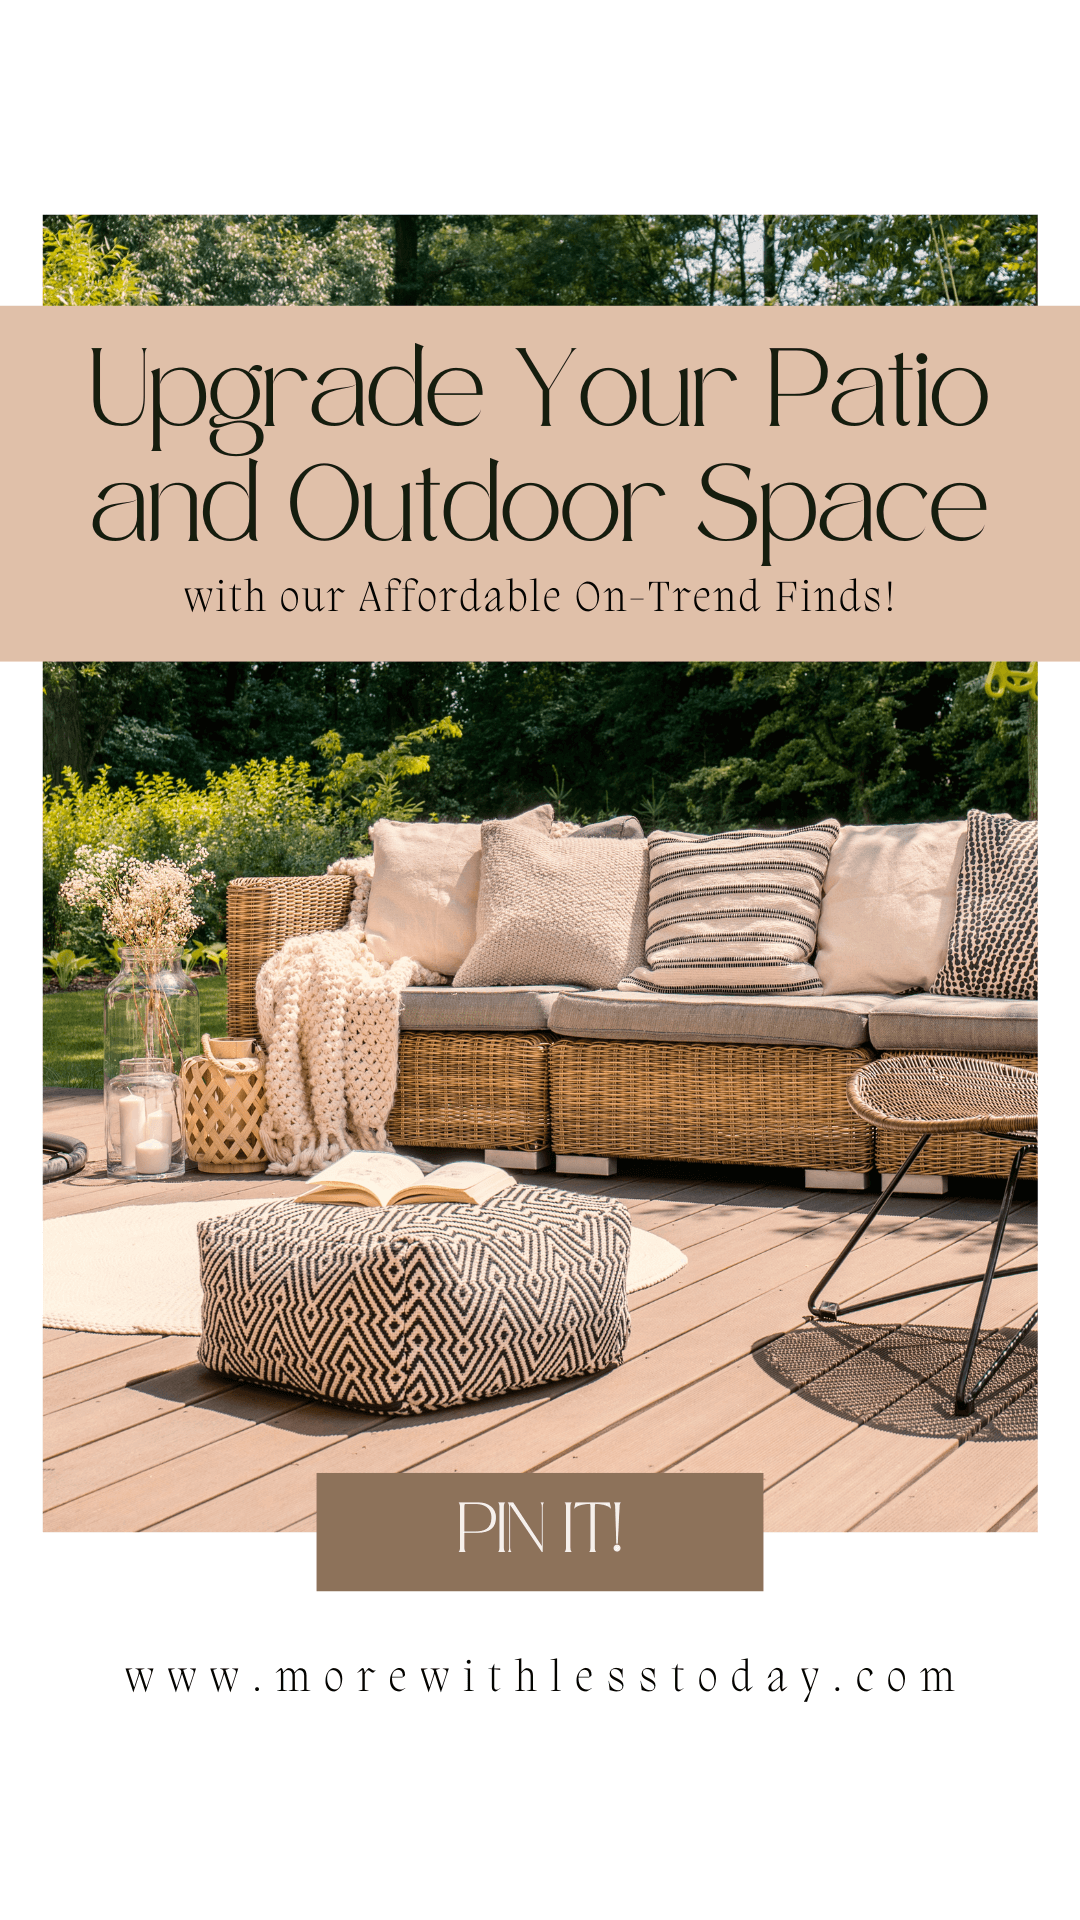 Upgrade Your Patio and Outdoor Space with Affordable On-Trend Finds - PIN